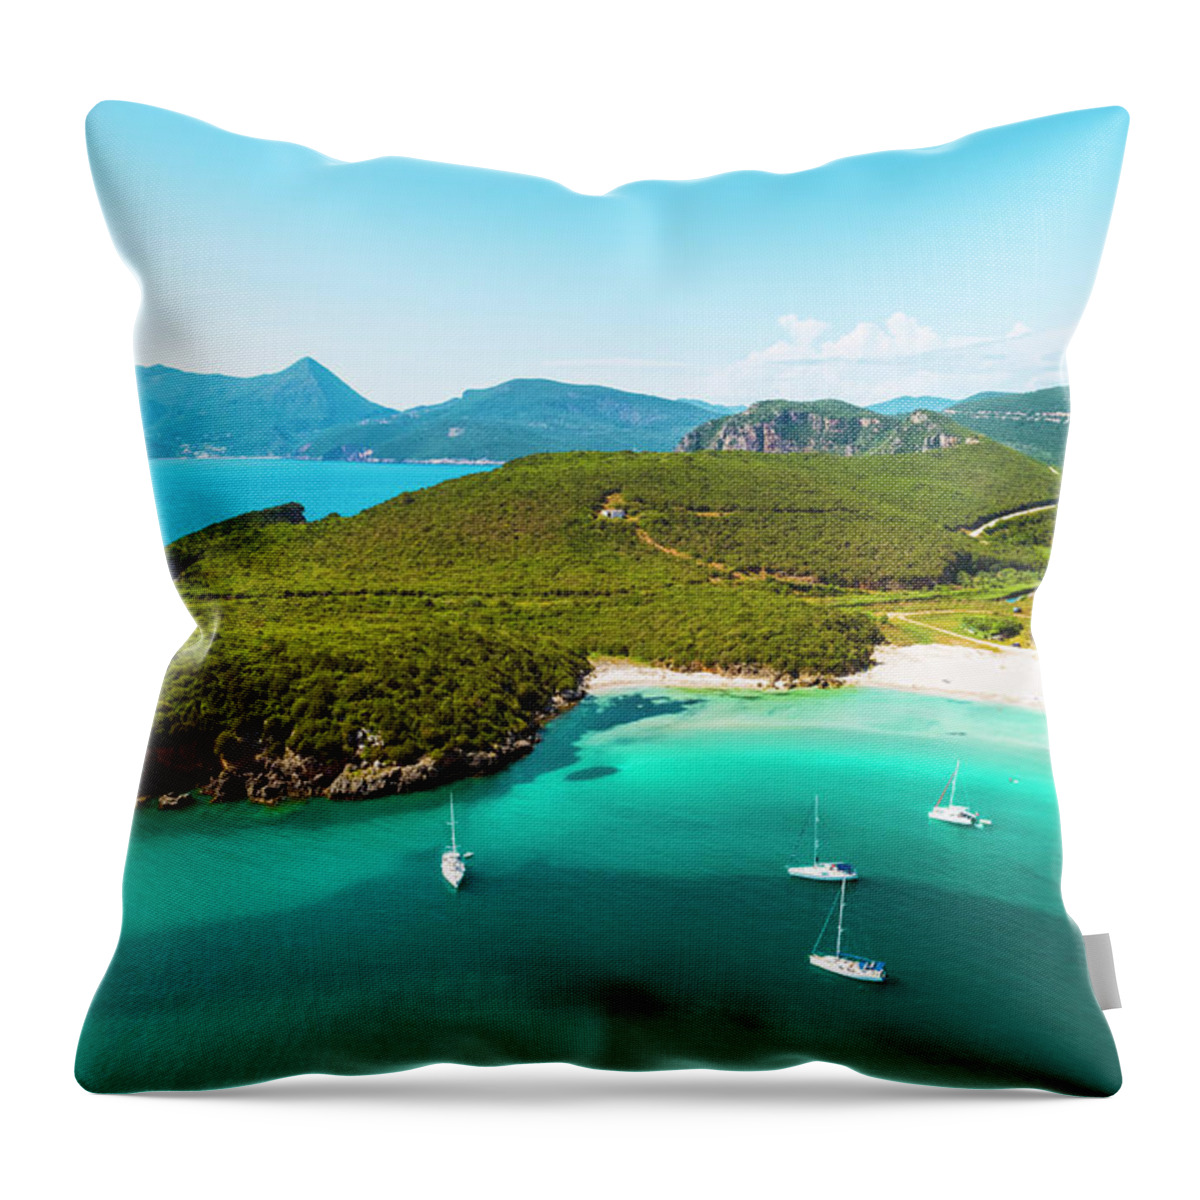 Estock Throw Pillow featuring the digital art Greece, Epirus, Preveza, Mediterranean Sea, Aerial View Of Nicos Beach In Ammoudia With Sailing Boats, A Small Fishing Village by Armand Ahmed Tamboly